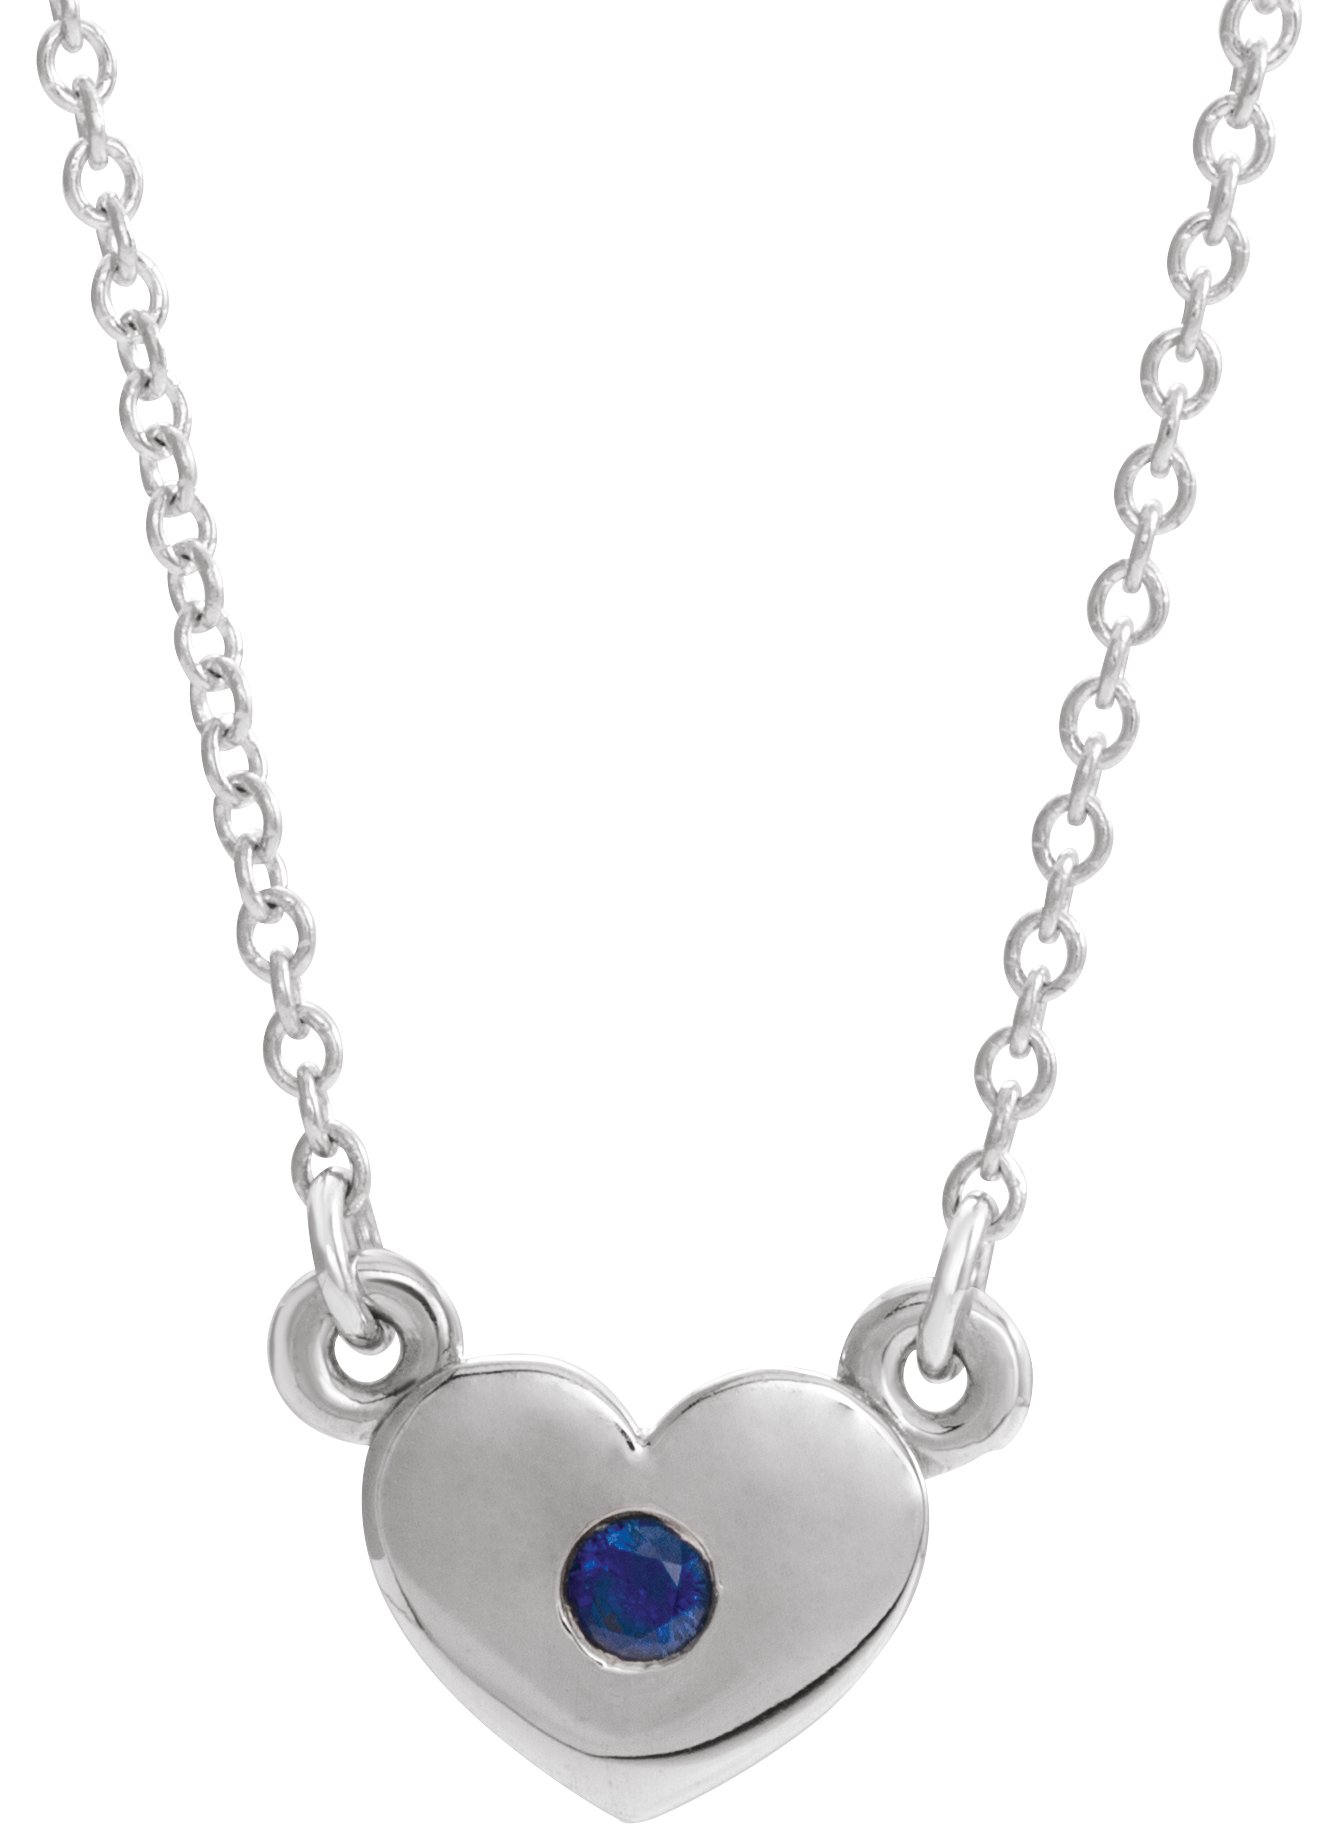 Heart Lock Necklace With Natural White Sapphire